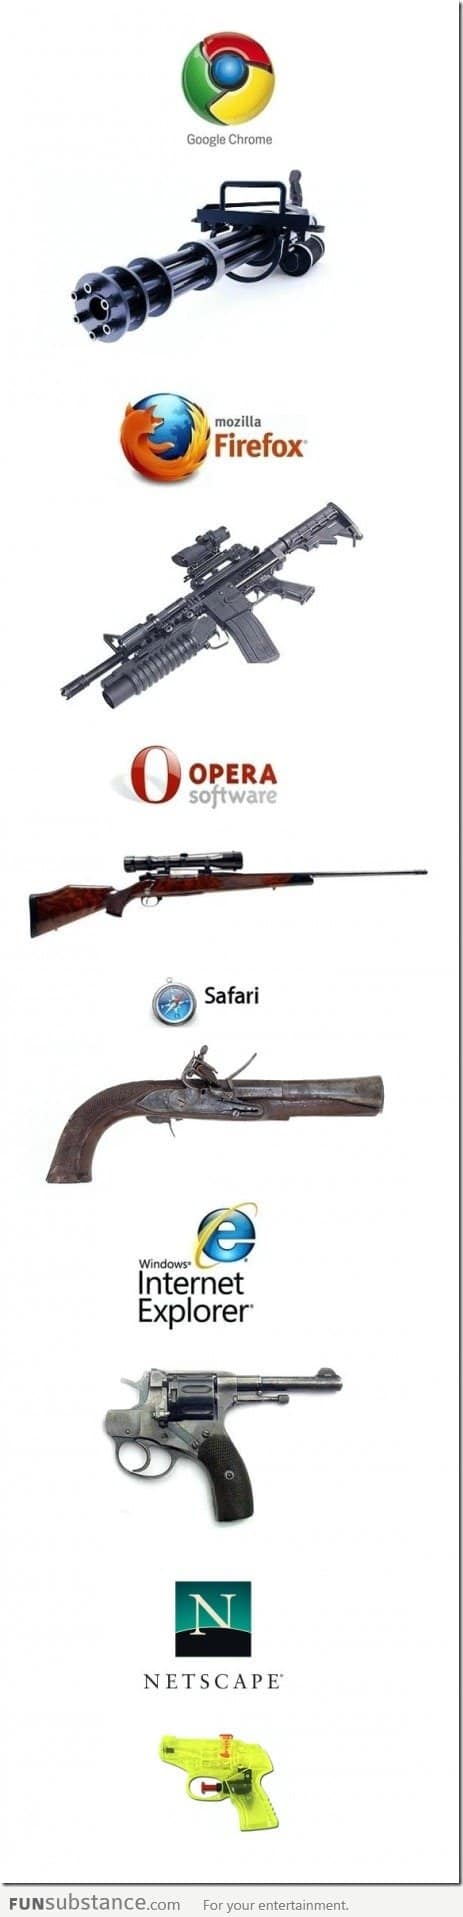 Internet Browsers and Guns